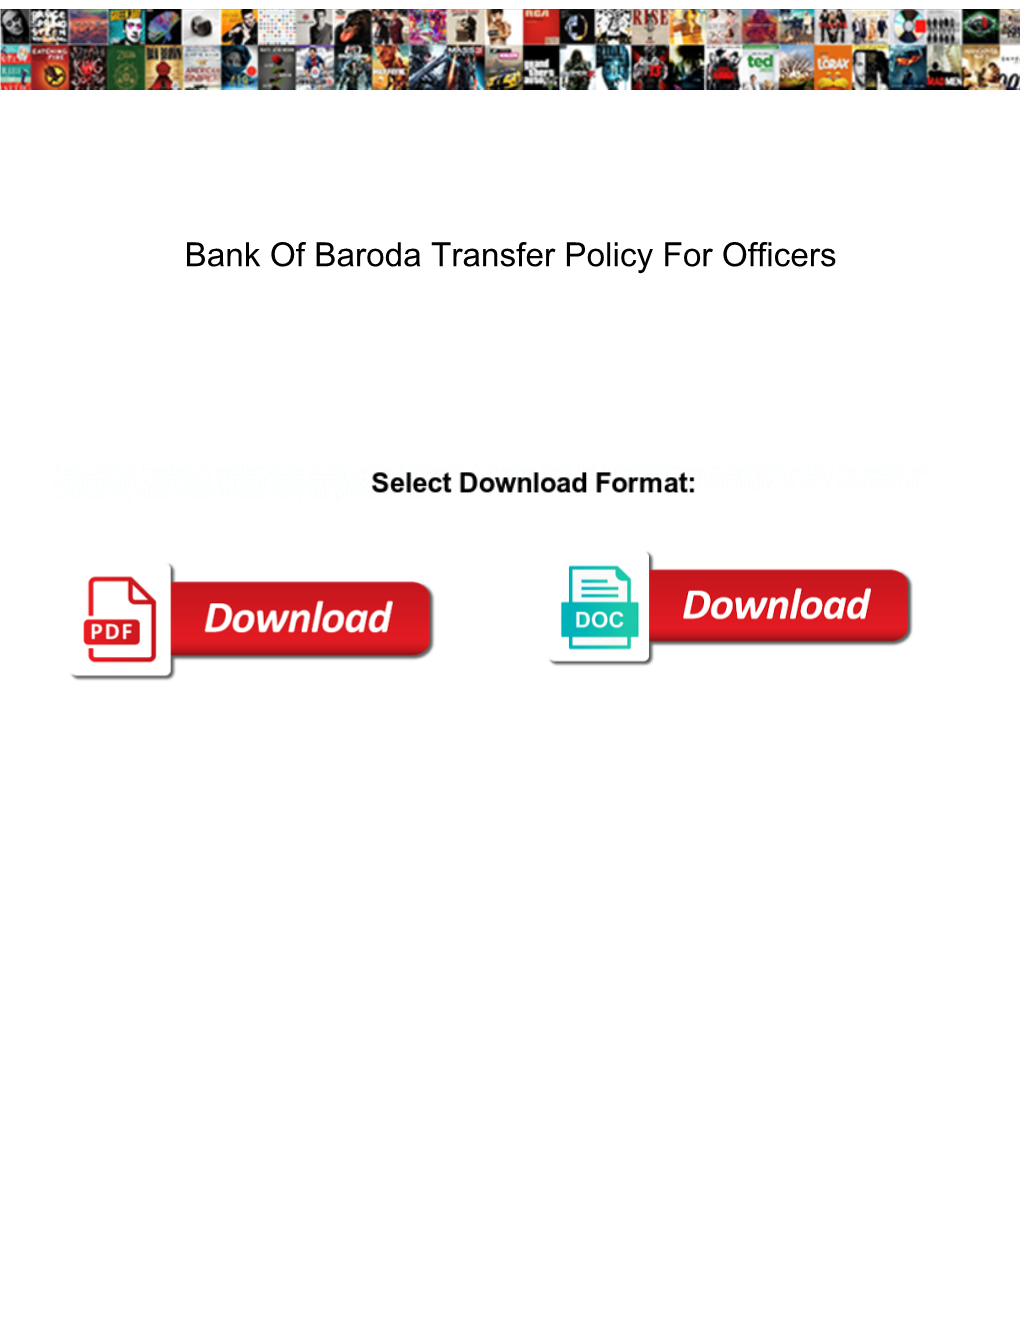 Bank of Baroda Transfer Policy for Officers